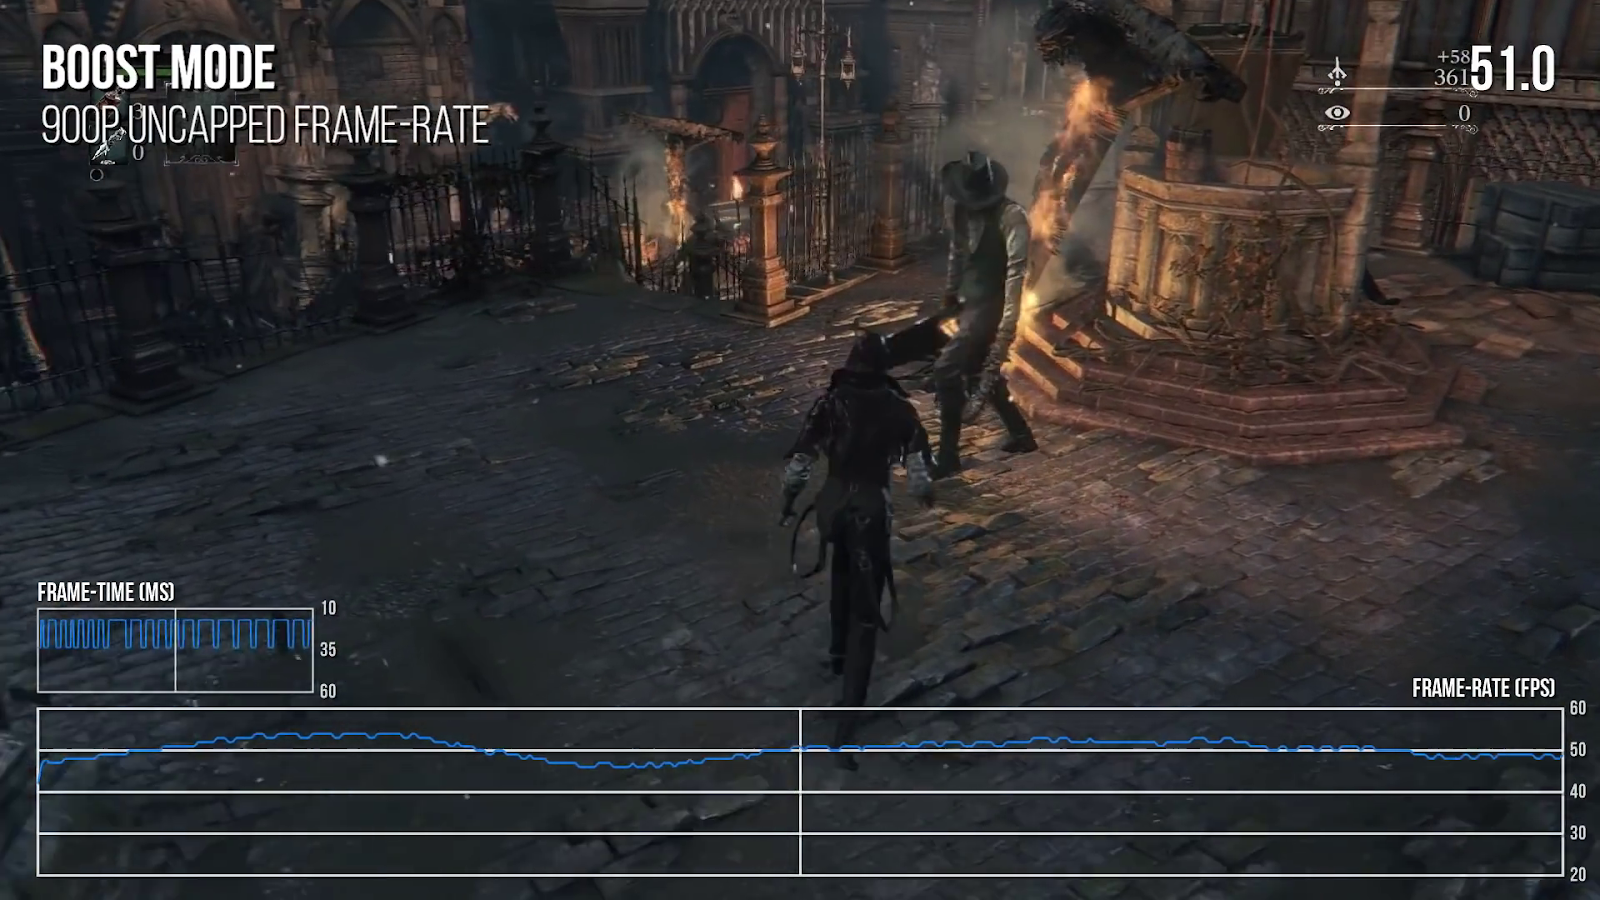 PS4 Emulator RPCSX Gets Big FPS Boost  P.T & Bloodborne Tested (No  Graphics yet) 